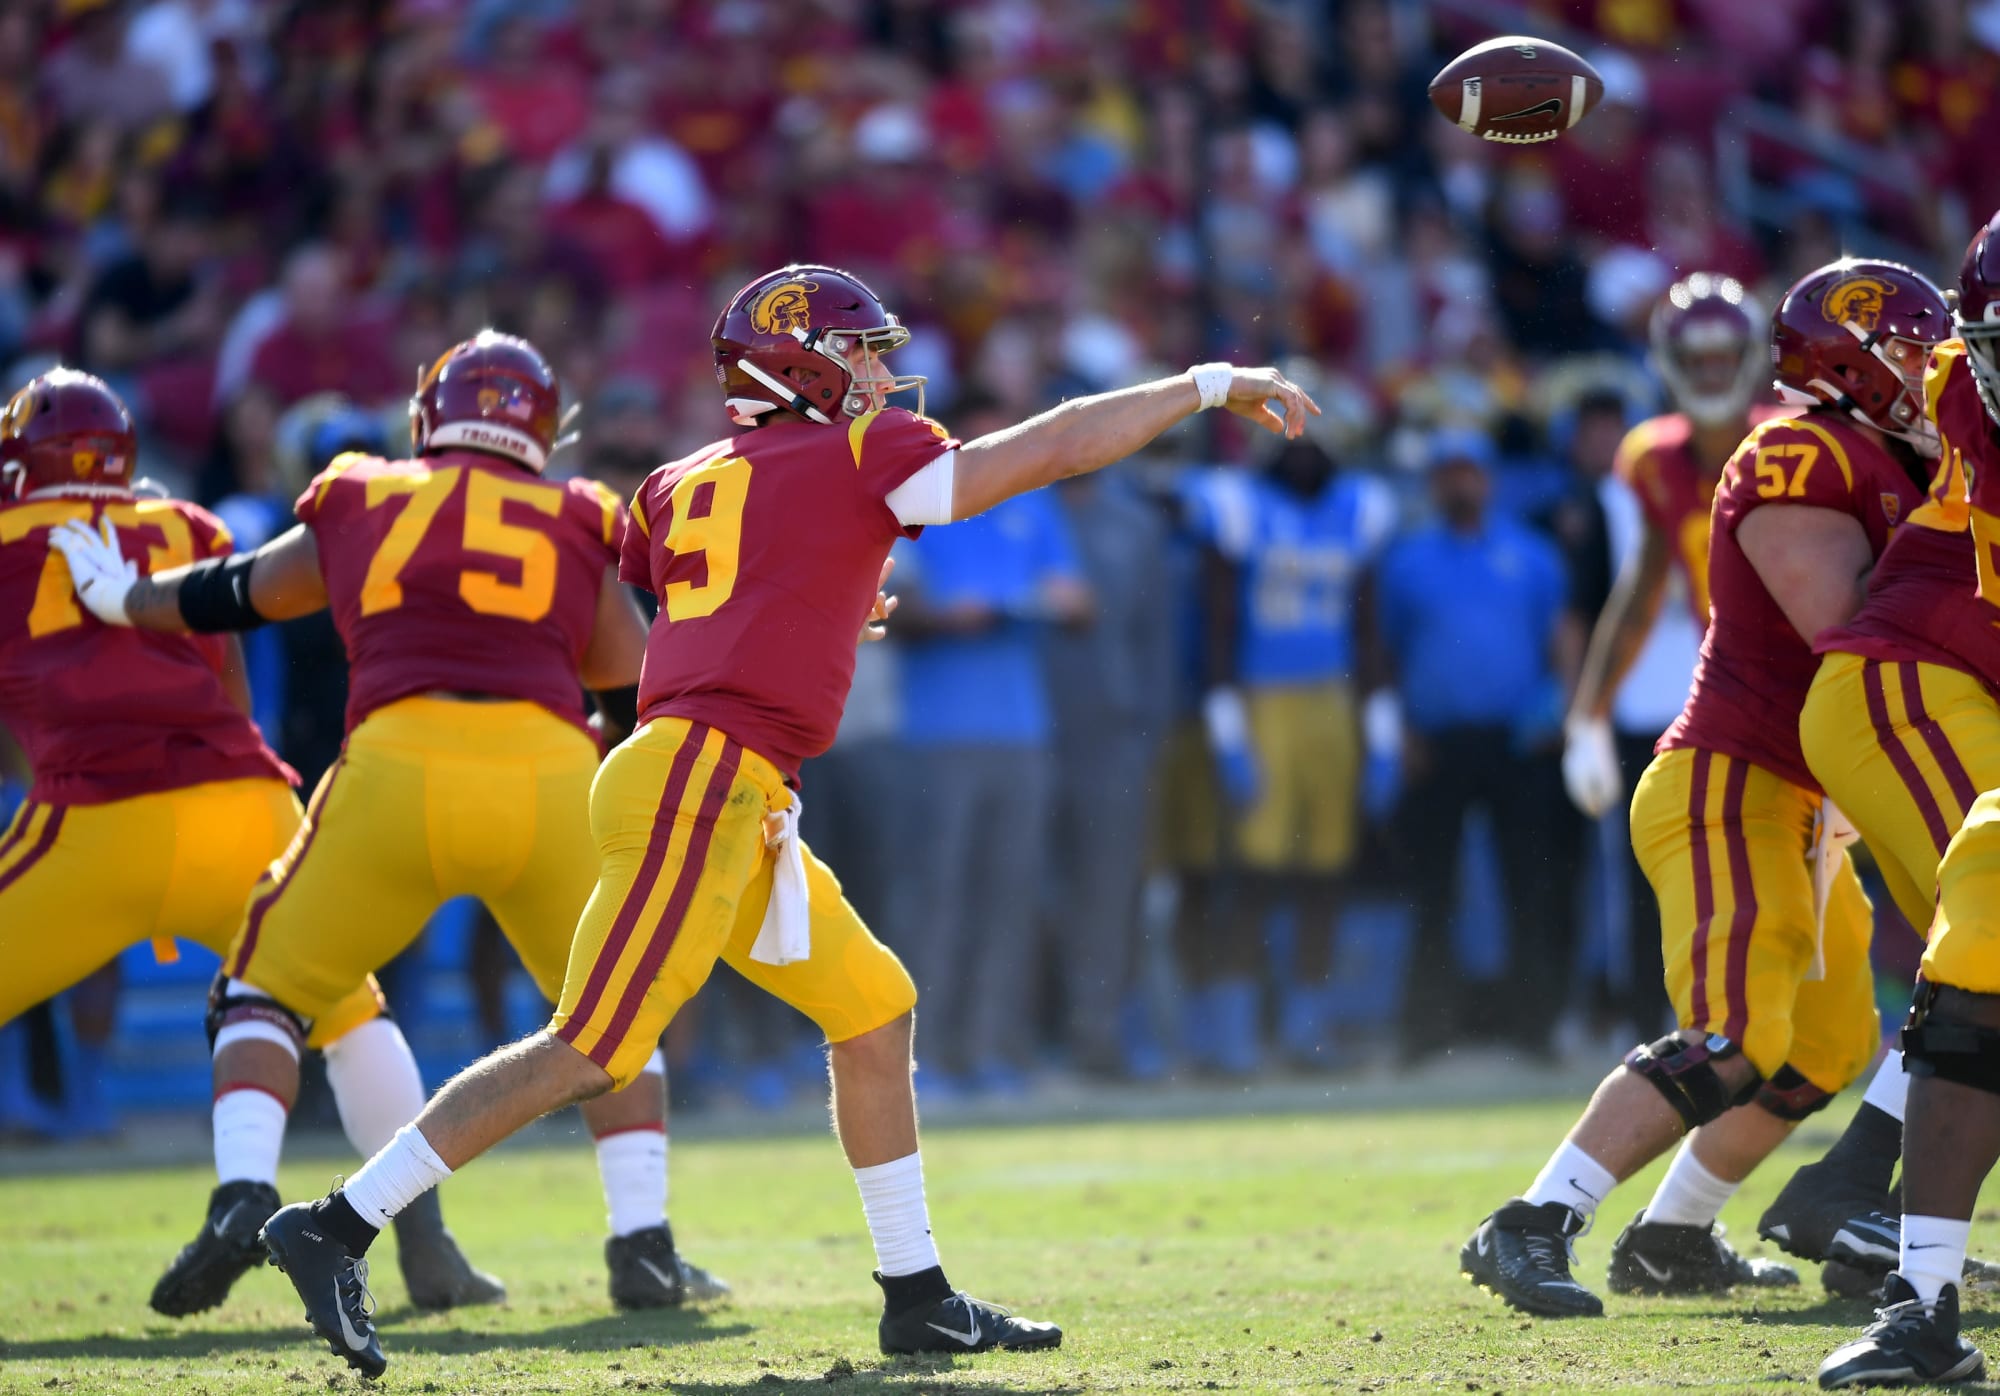 USC football news roundup: ESPN FPI projects Trojans' playoff hopes